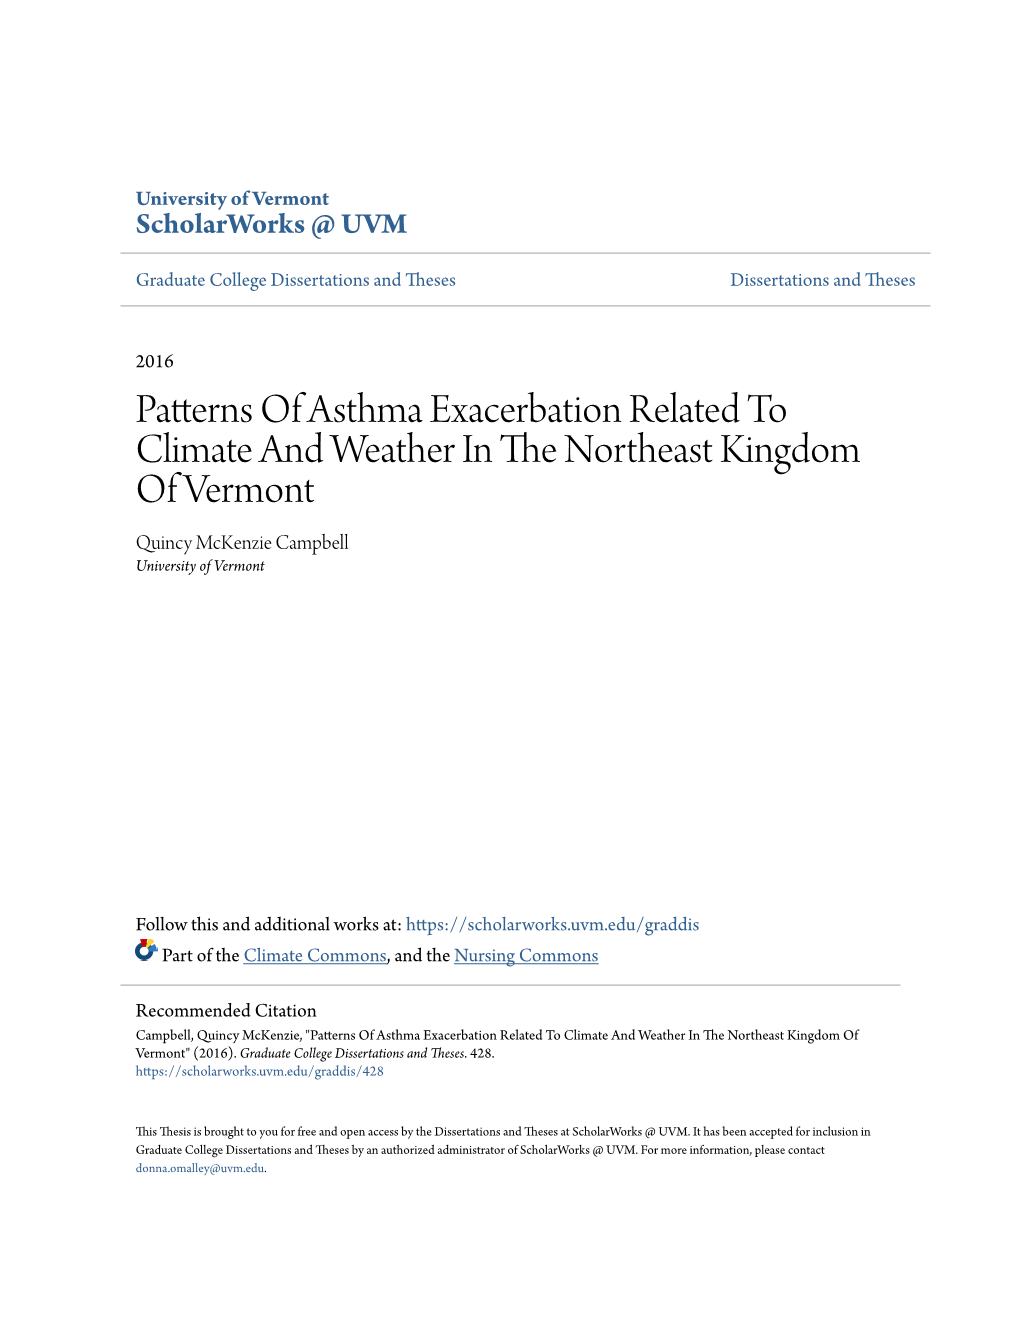 Patterns of Asthma Exacerbation Related to Climate and Weather in the Orn Theast Kingdom of Vermont Quincy Mckenzie Campbell University of Vermont